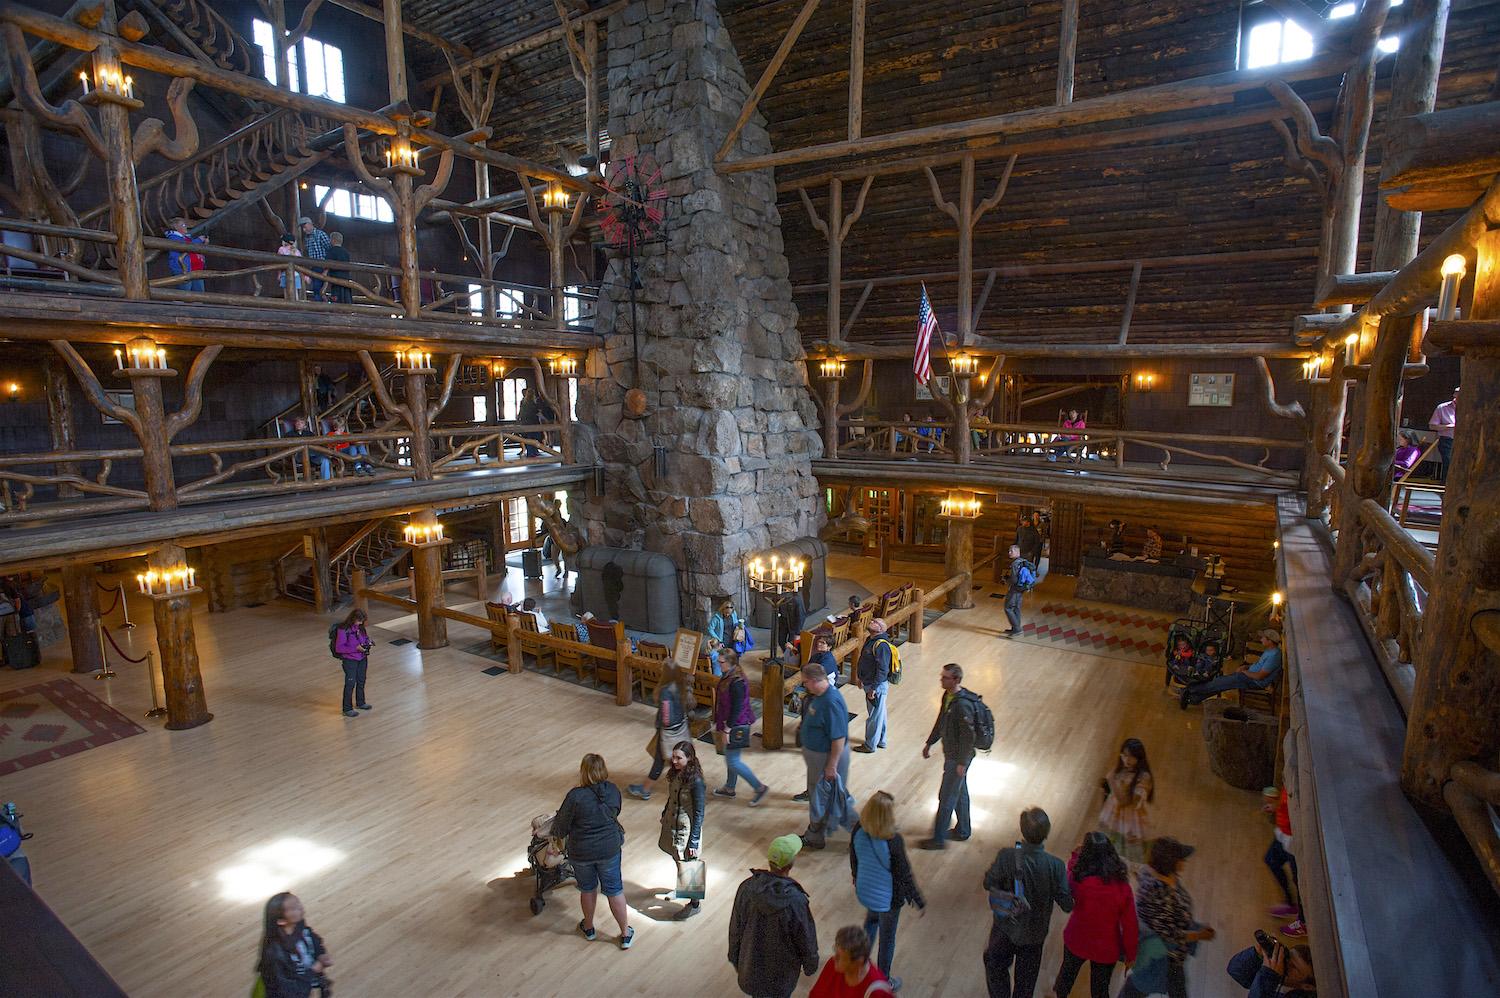 Designed by Robert Reamer and built with local material in 1903 and 1904, Old Faithful Inn is considered the largest log building in the world. Pricing is determined by the free market, and room rates can run well over $600 a night during peak summer/Patr